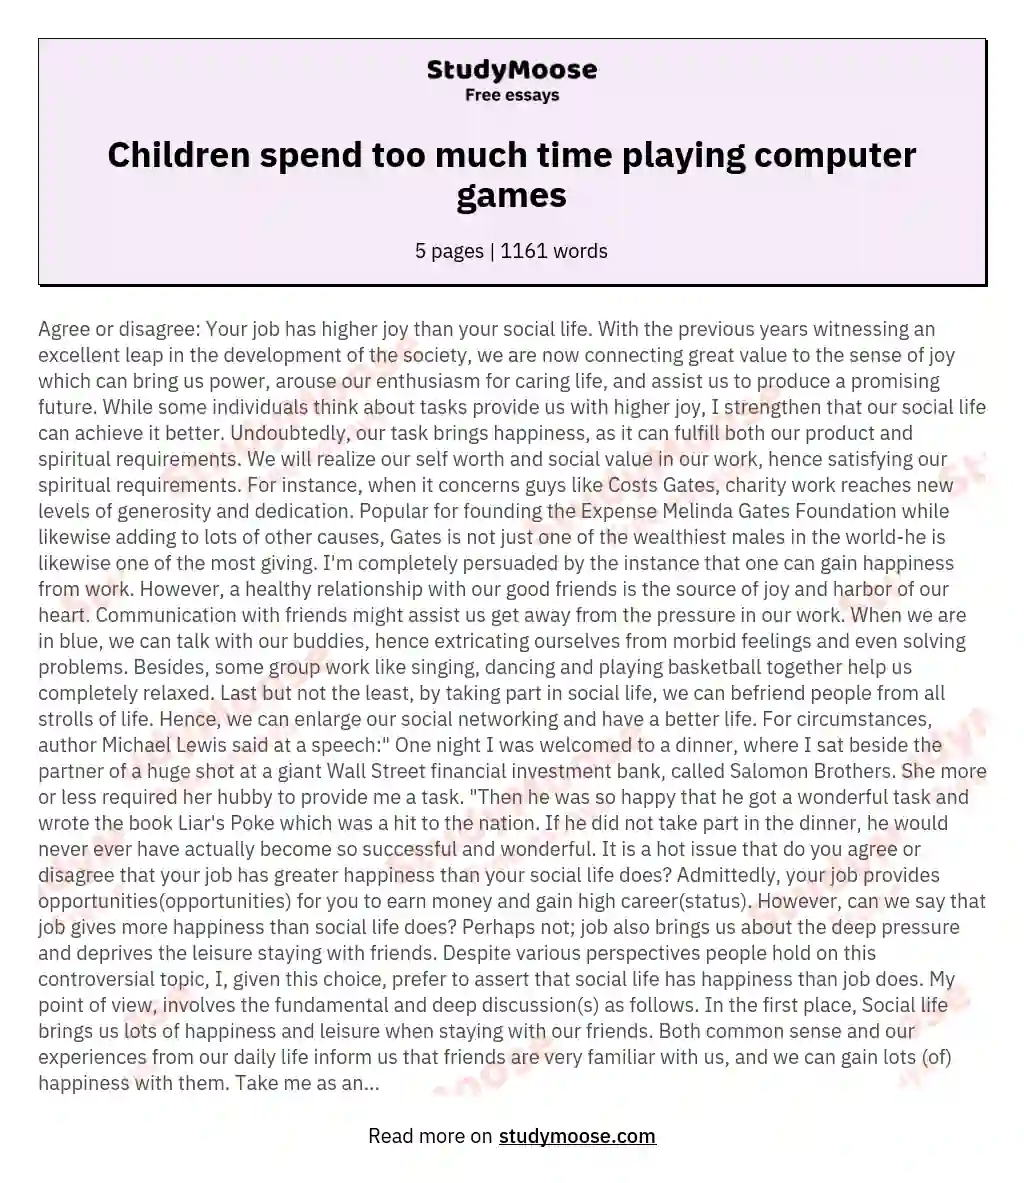 Children spend too much time playing computer games